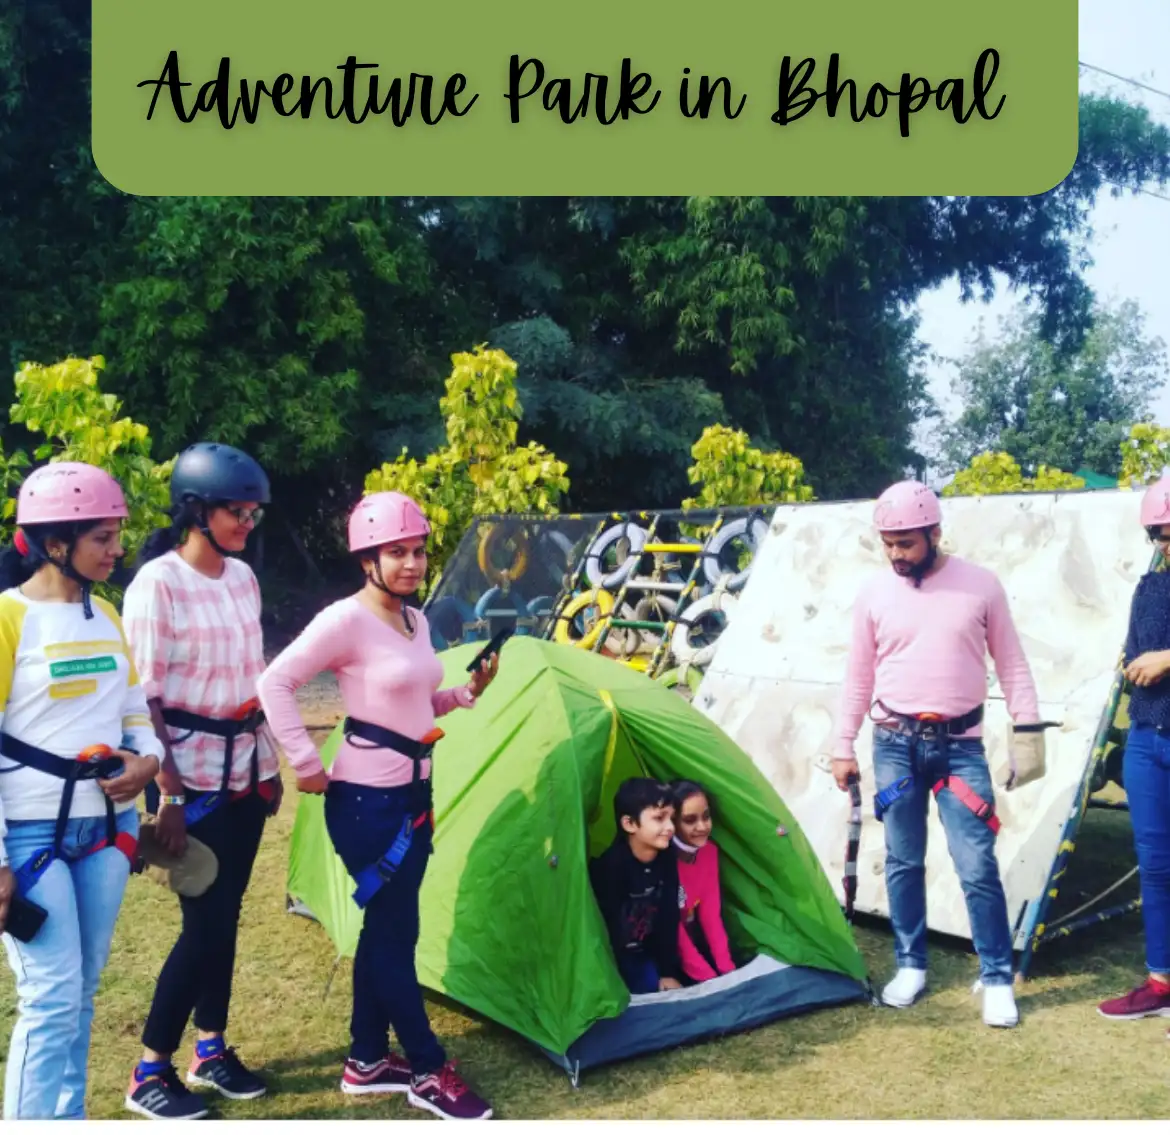 Adventure Park in Bhopal Tickets